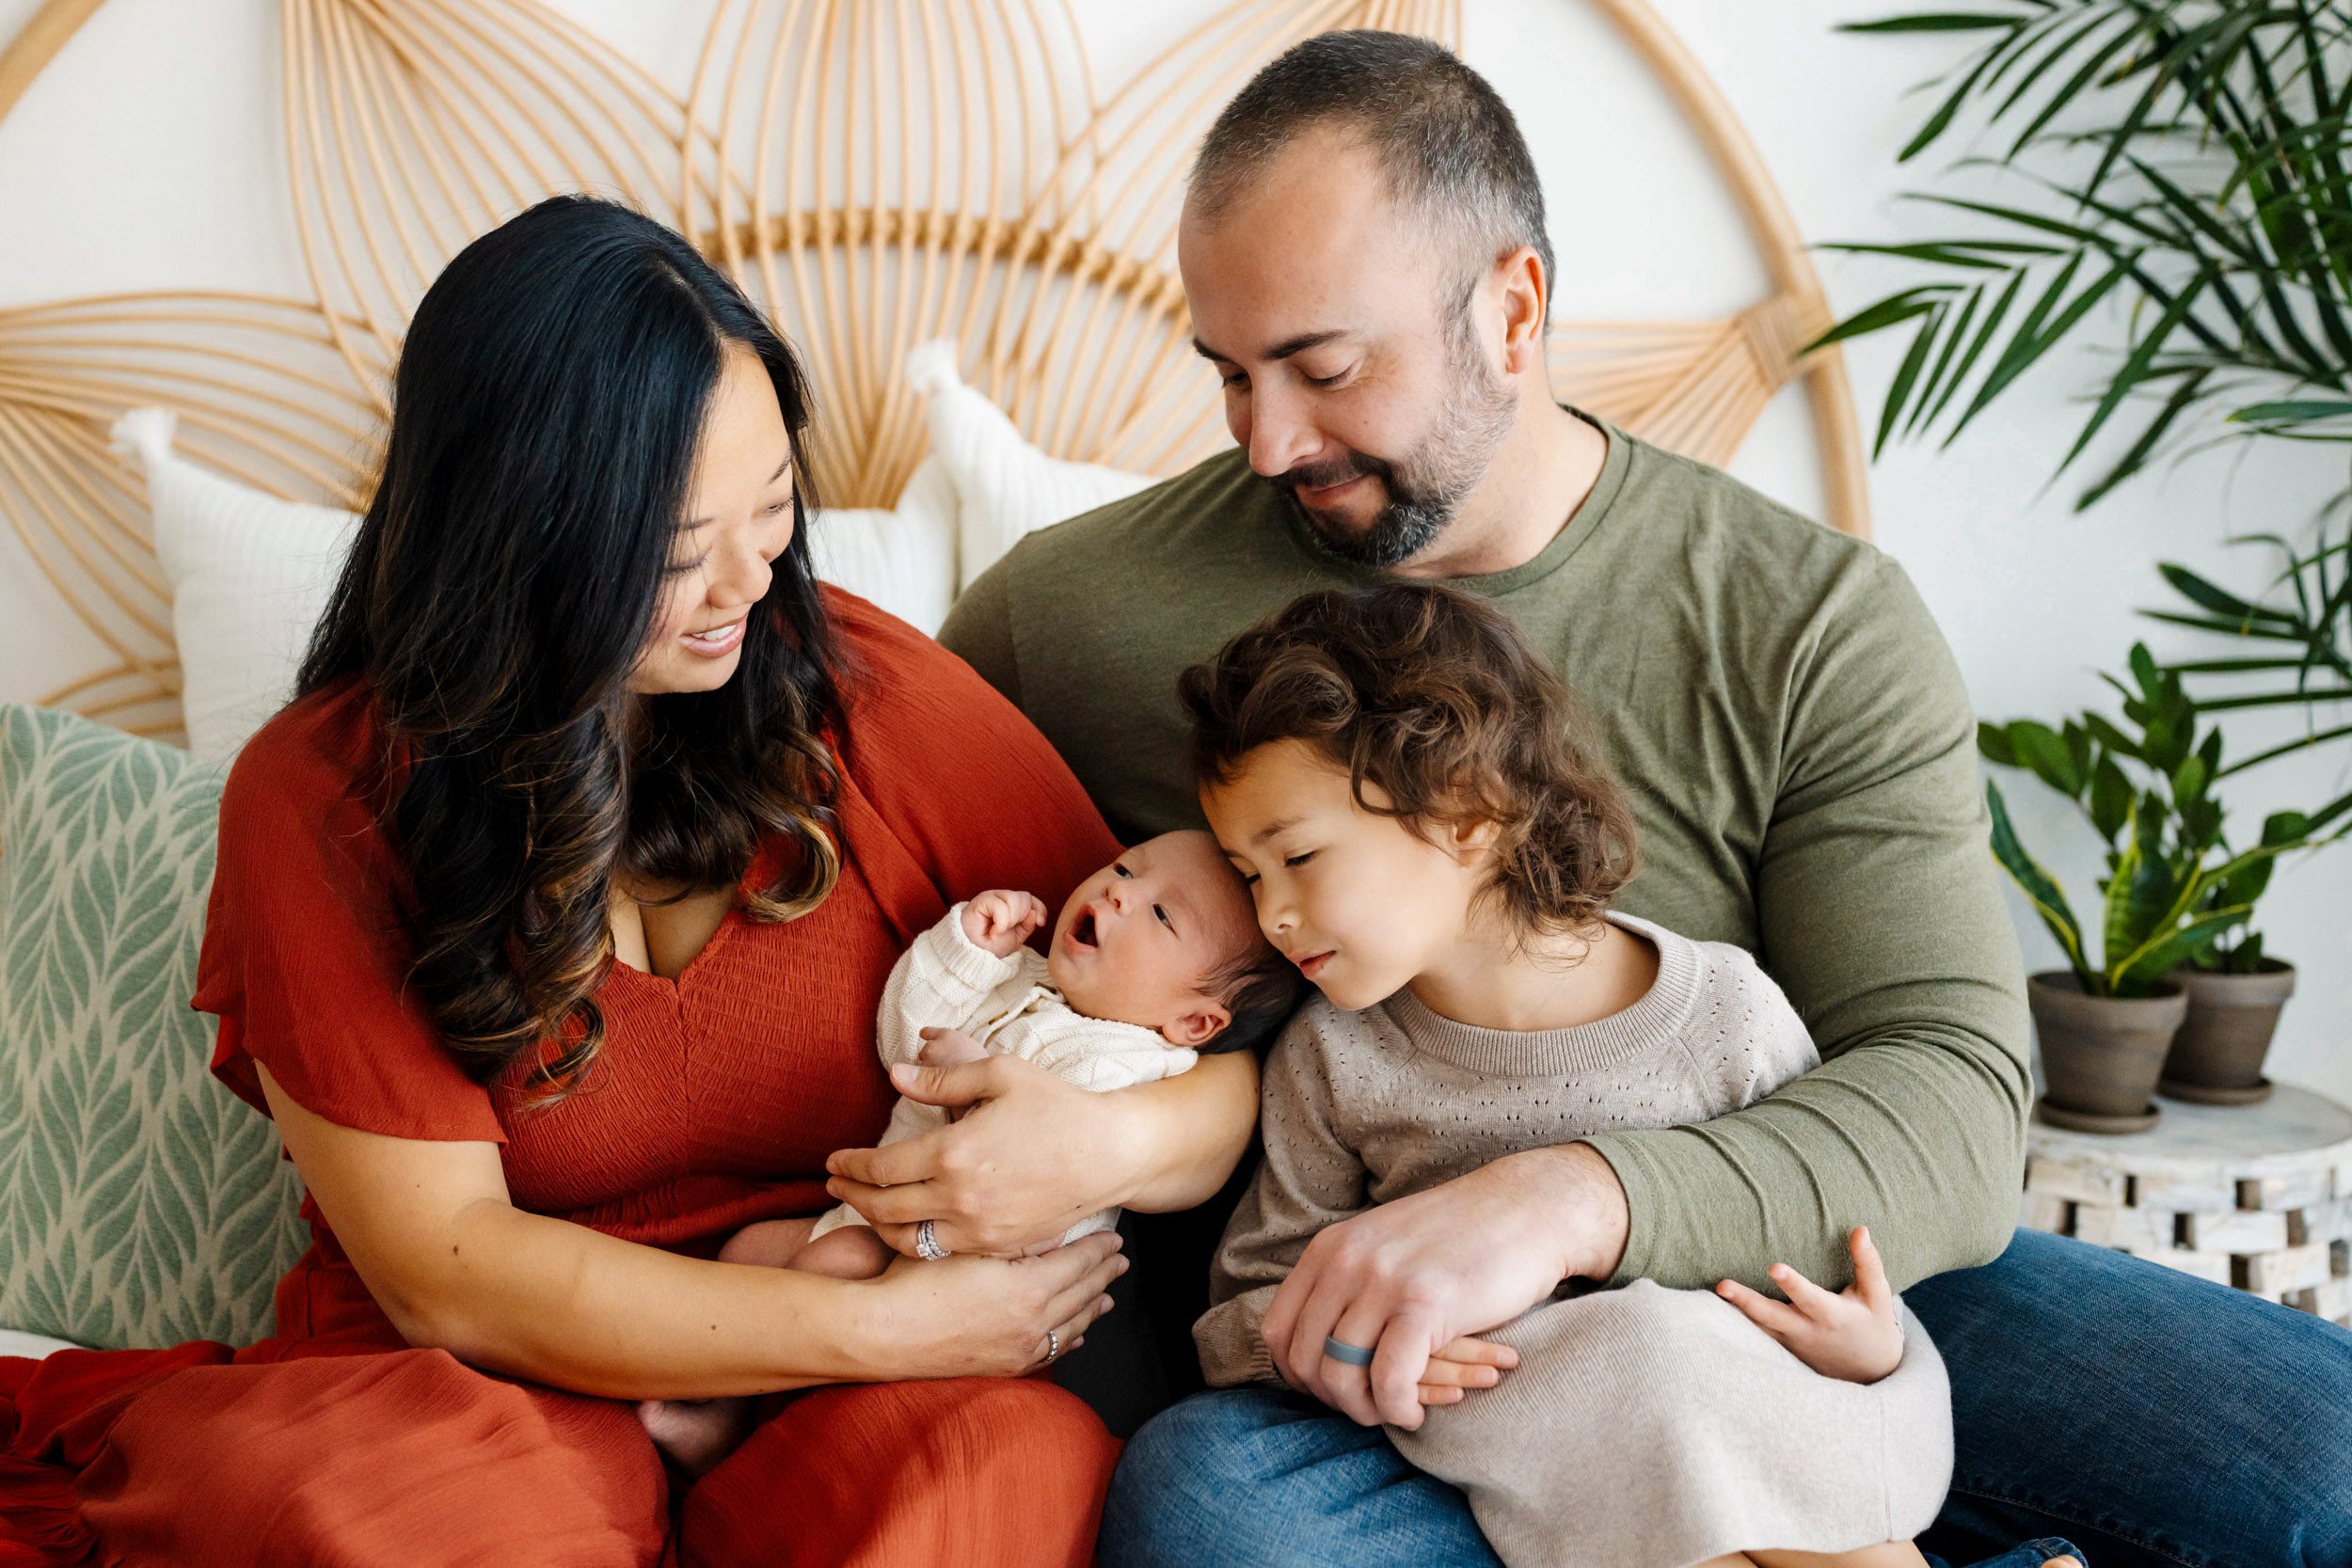 a family of four sitting on a bed and smiling down at their new baby boy cradled in mom's arms while big sister rests her head against the baby during a family centered newborn photo session